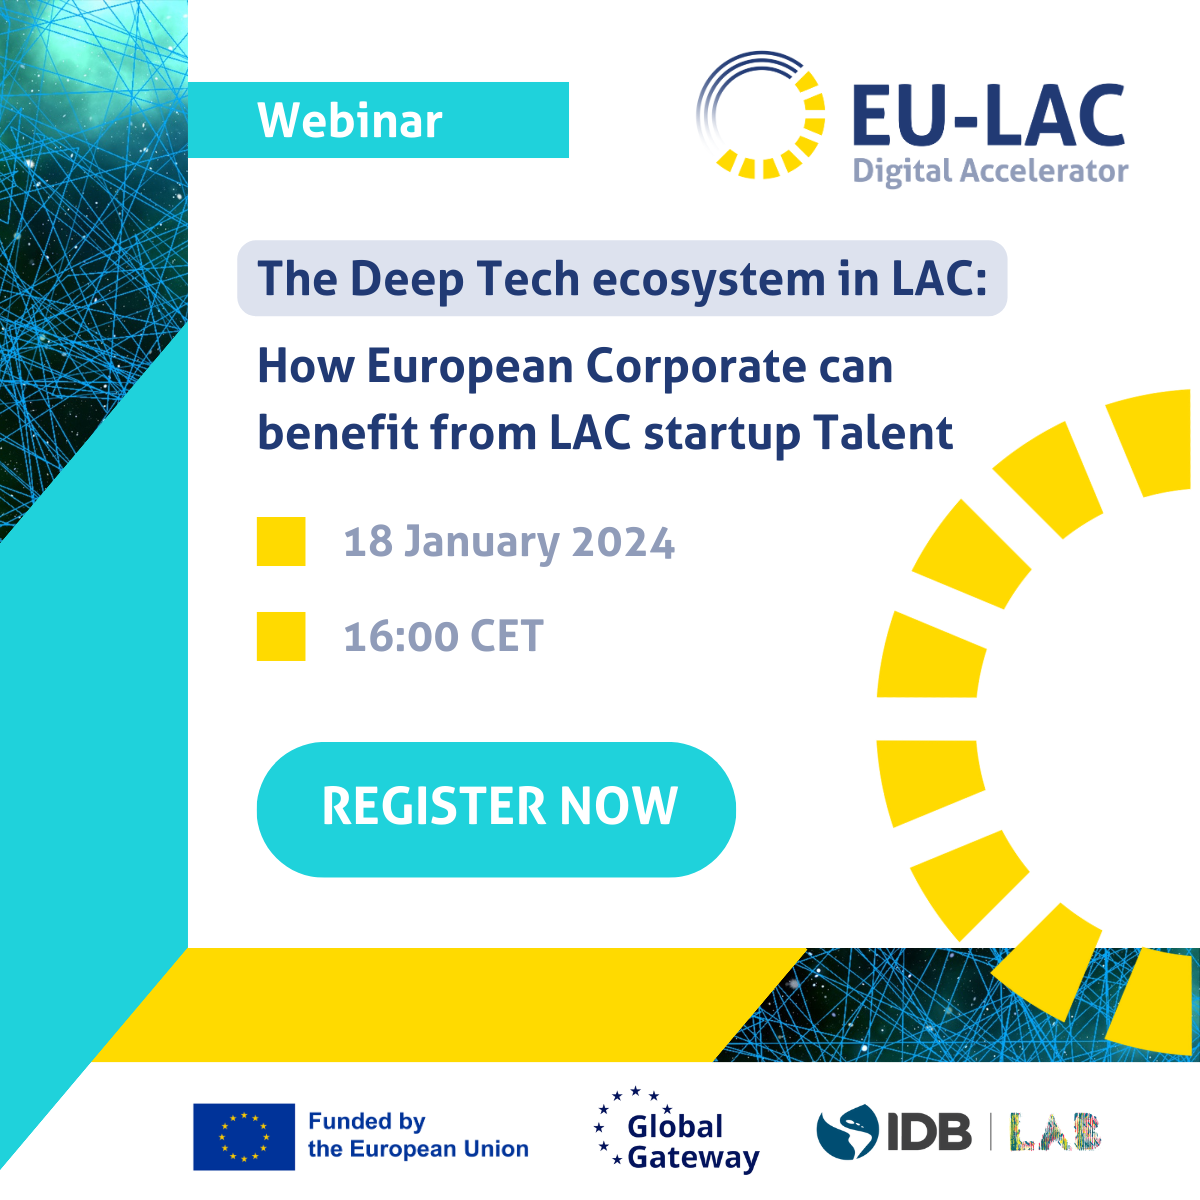 Webinar – The Deep Tech ecosystem in LAC: How European Corporates can benefit from LAC startup Talent